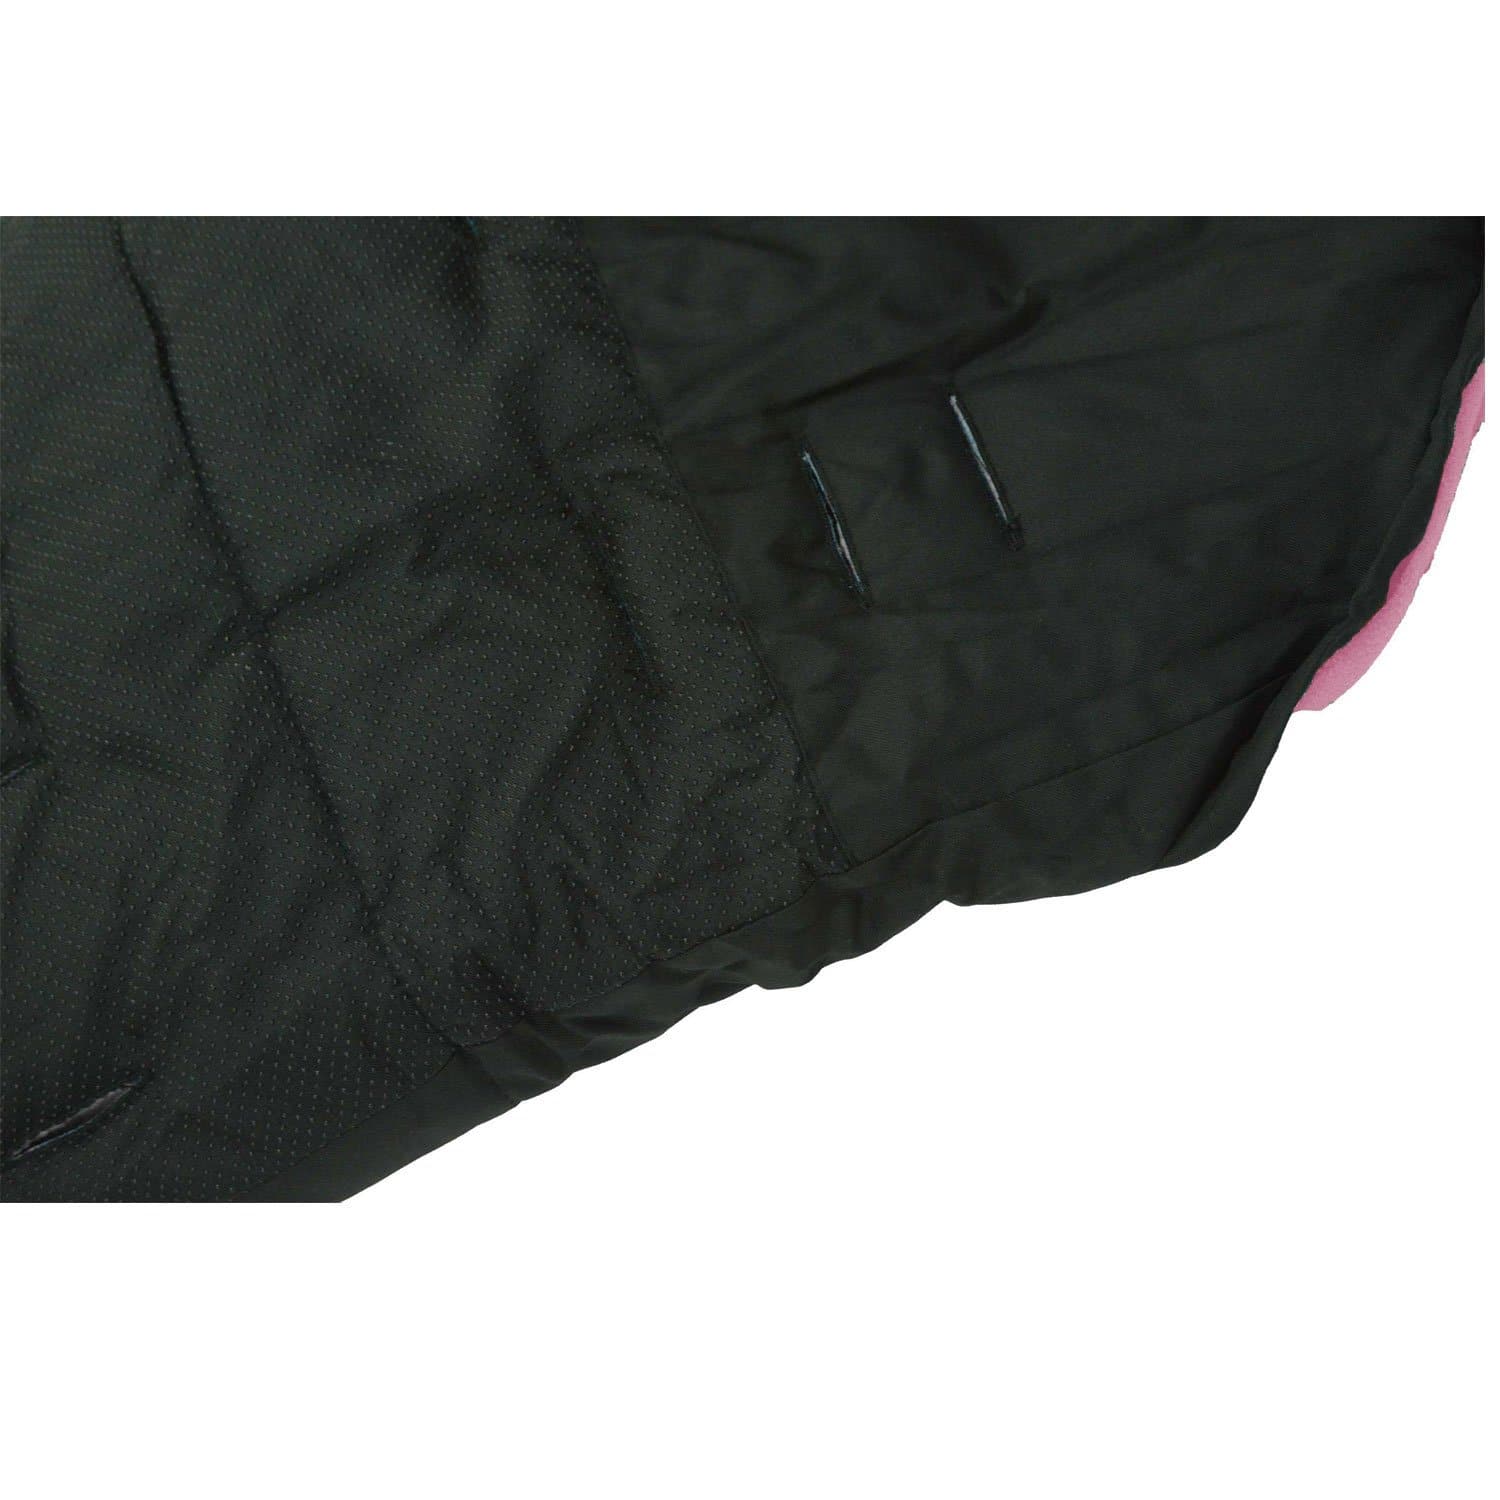 Universal Deluxe Pushchair Footmuff / Cosy Toes - Fits All Pushchairs / Prams And Buggies - For Your Little One